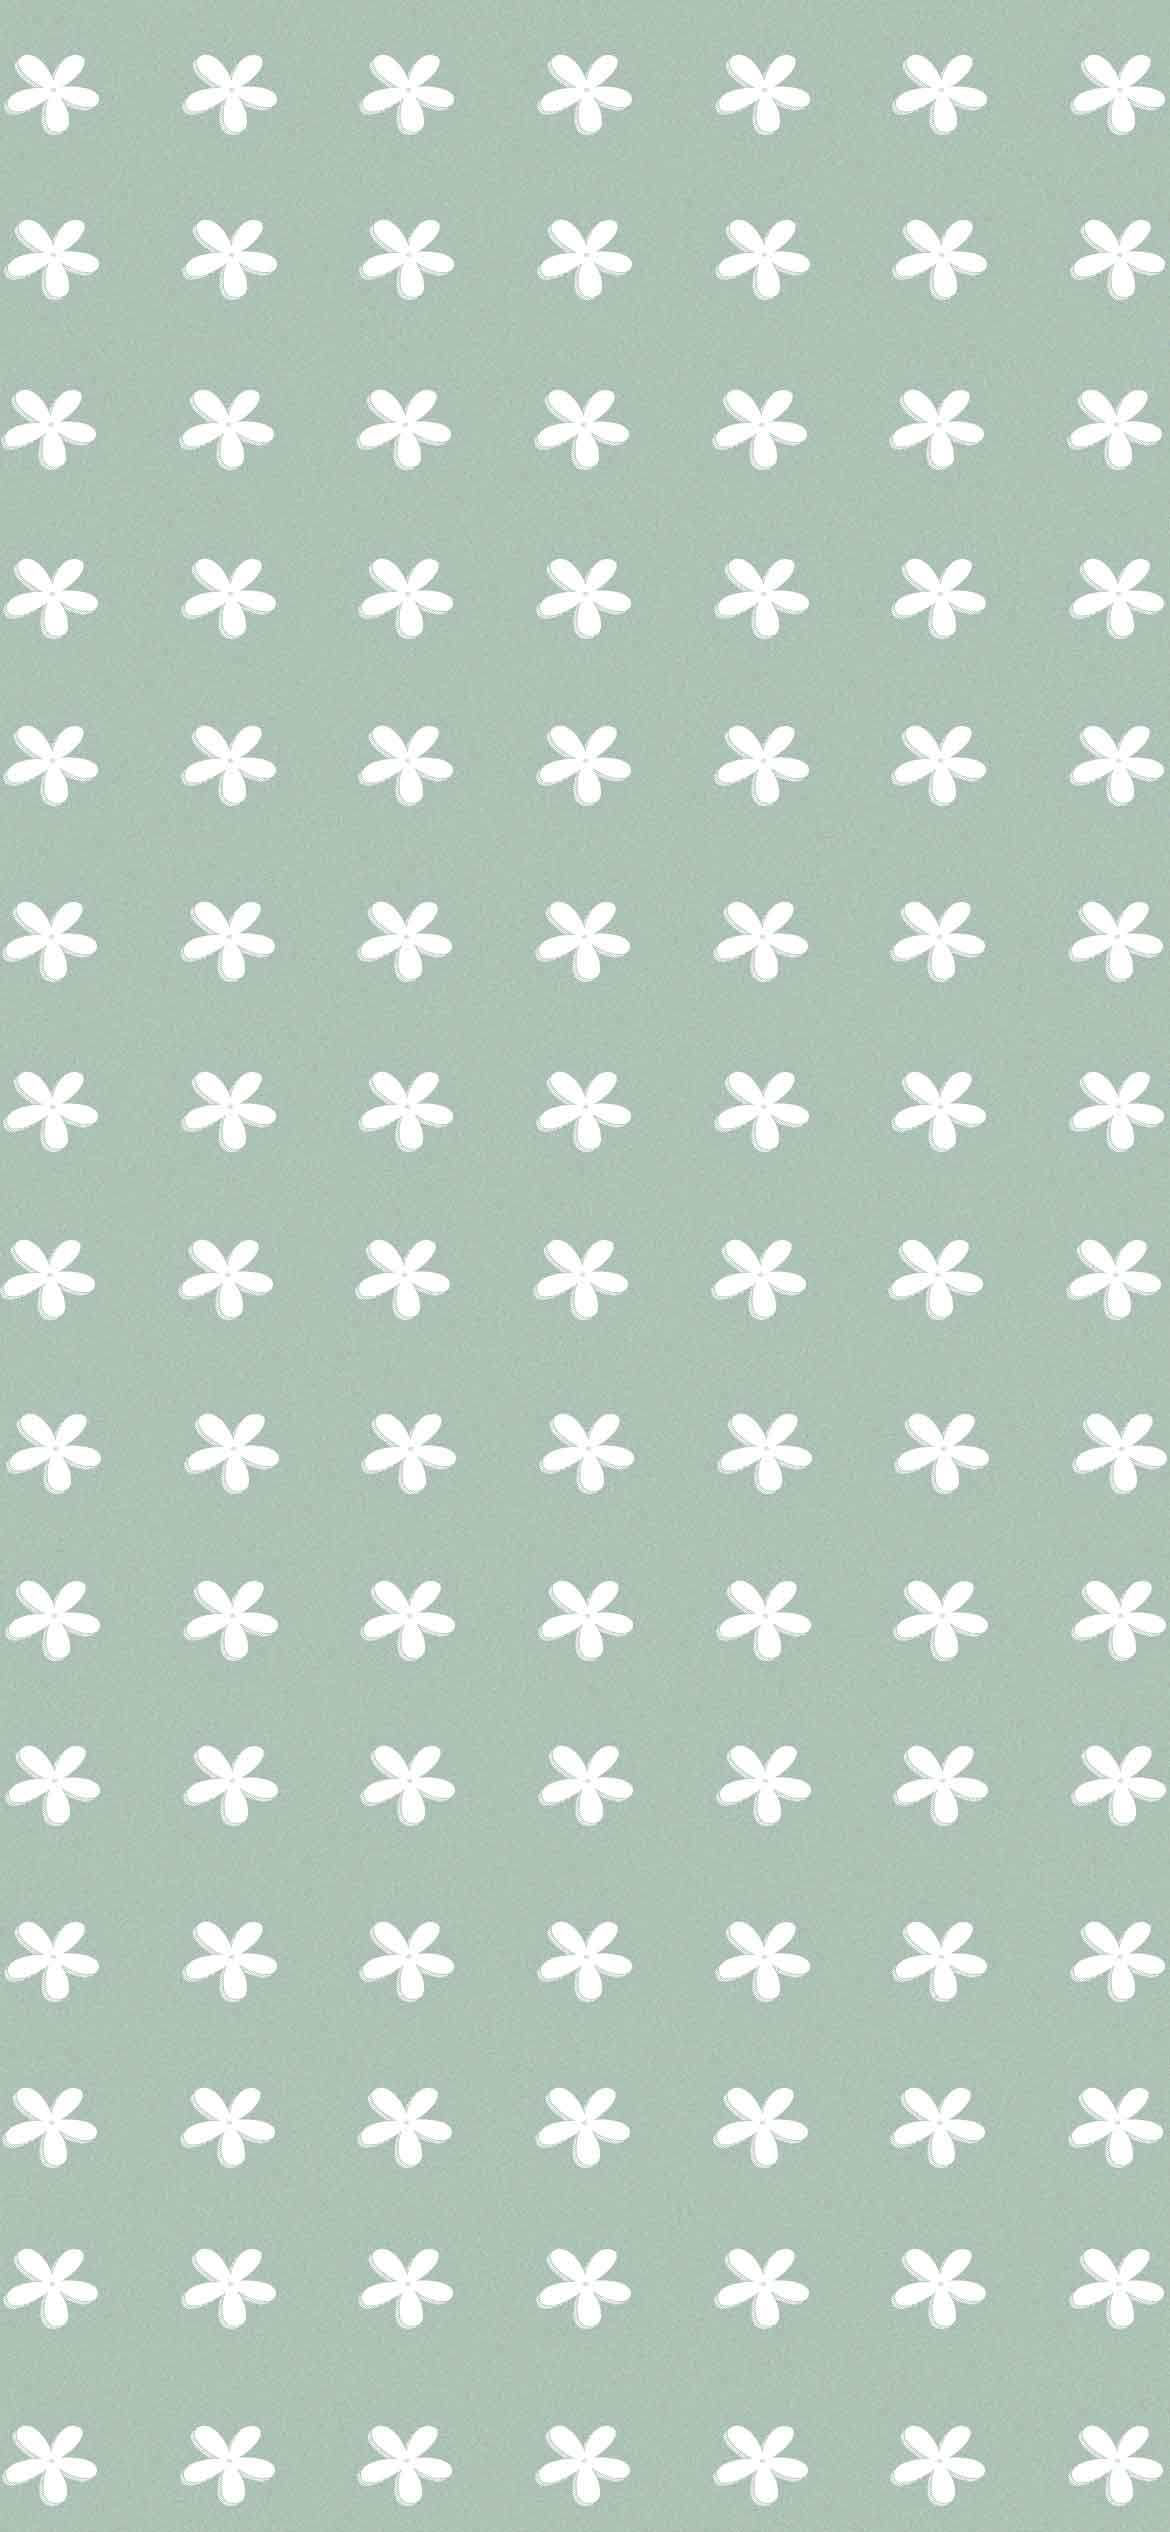 : a pattern of white and green crosses - Sage green, pastel green, aqua, simple